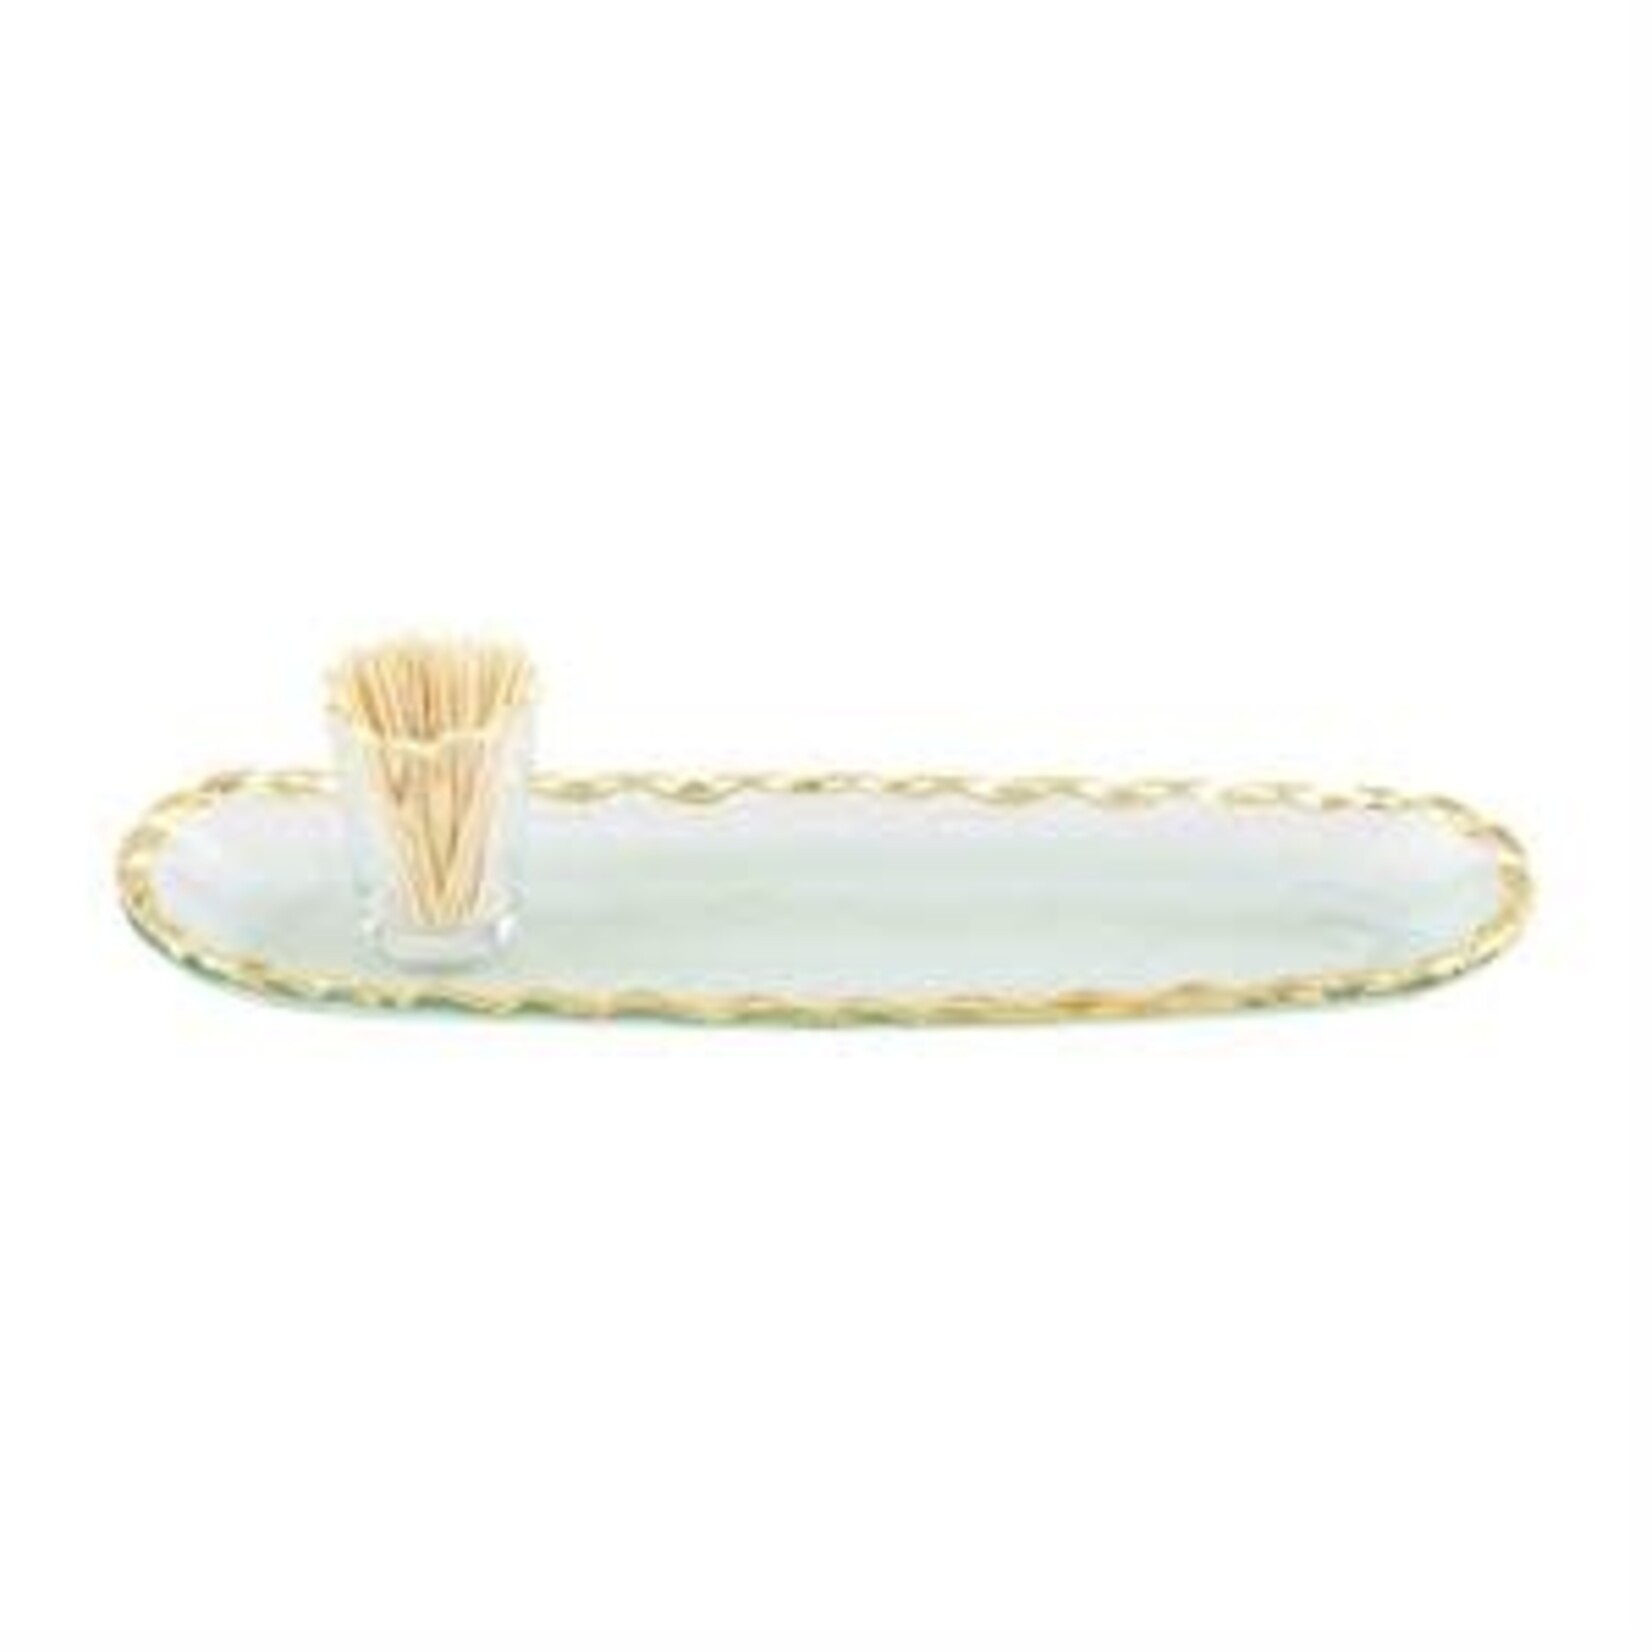 Mud Pie Gold Edge Tray - Oval (Tootl Pick Holder sold separately)